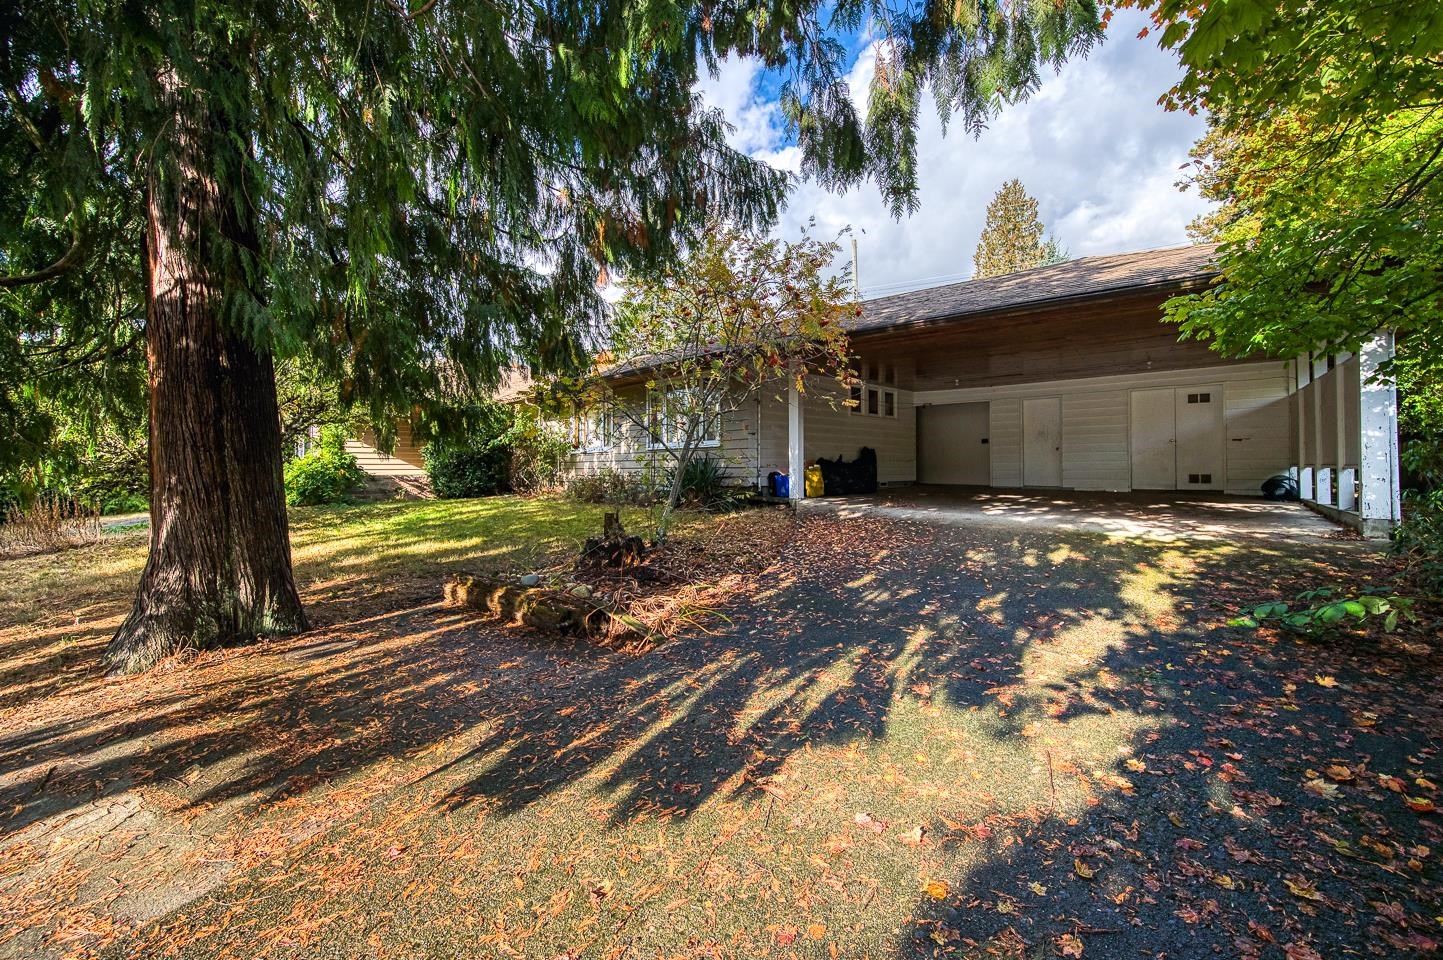 Listing image of 960 FOREST HILLS DRIVE